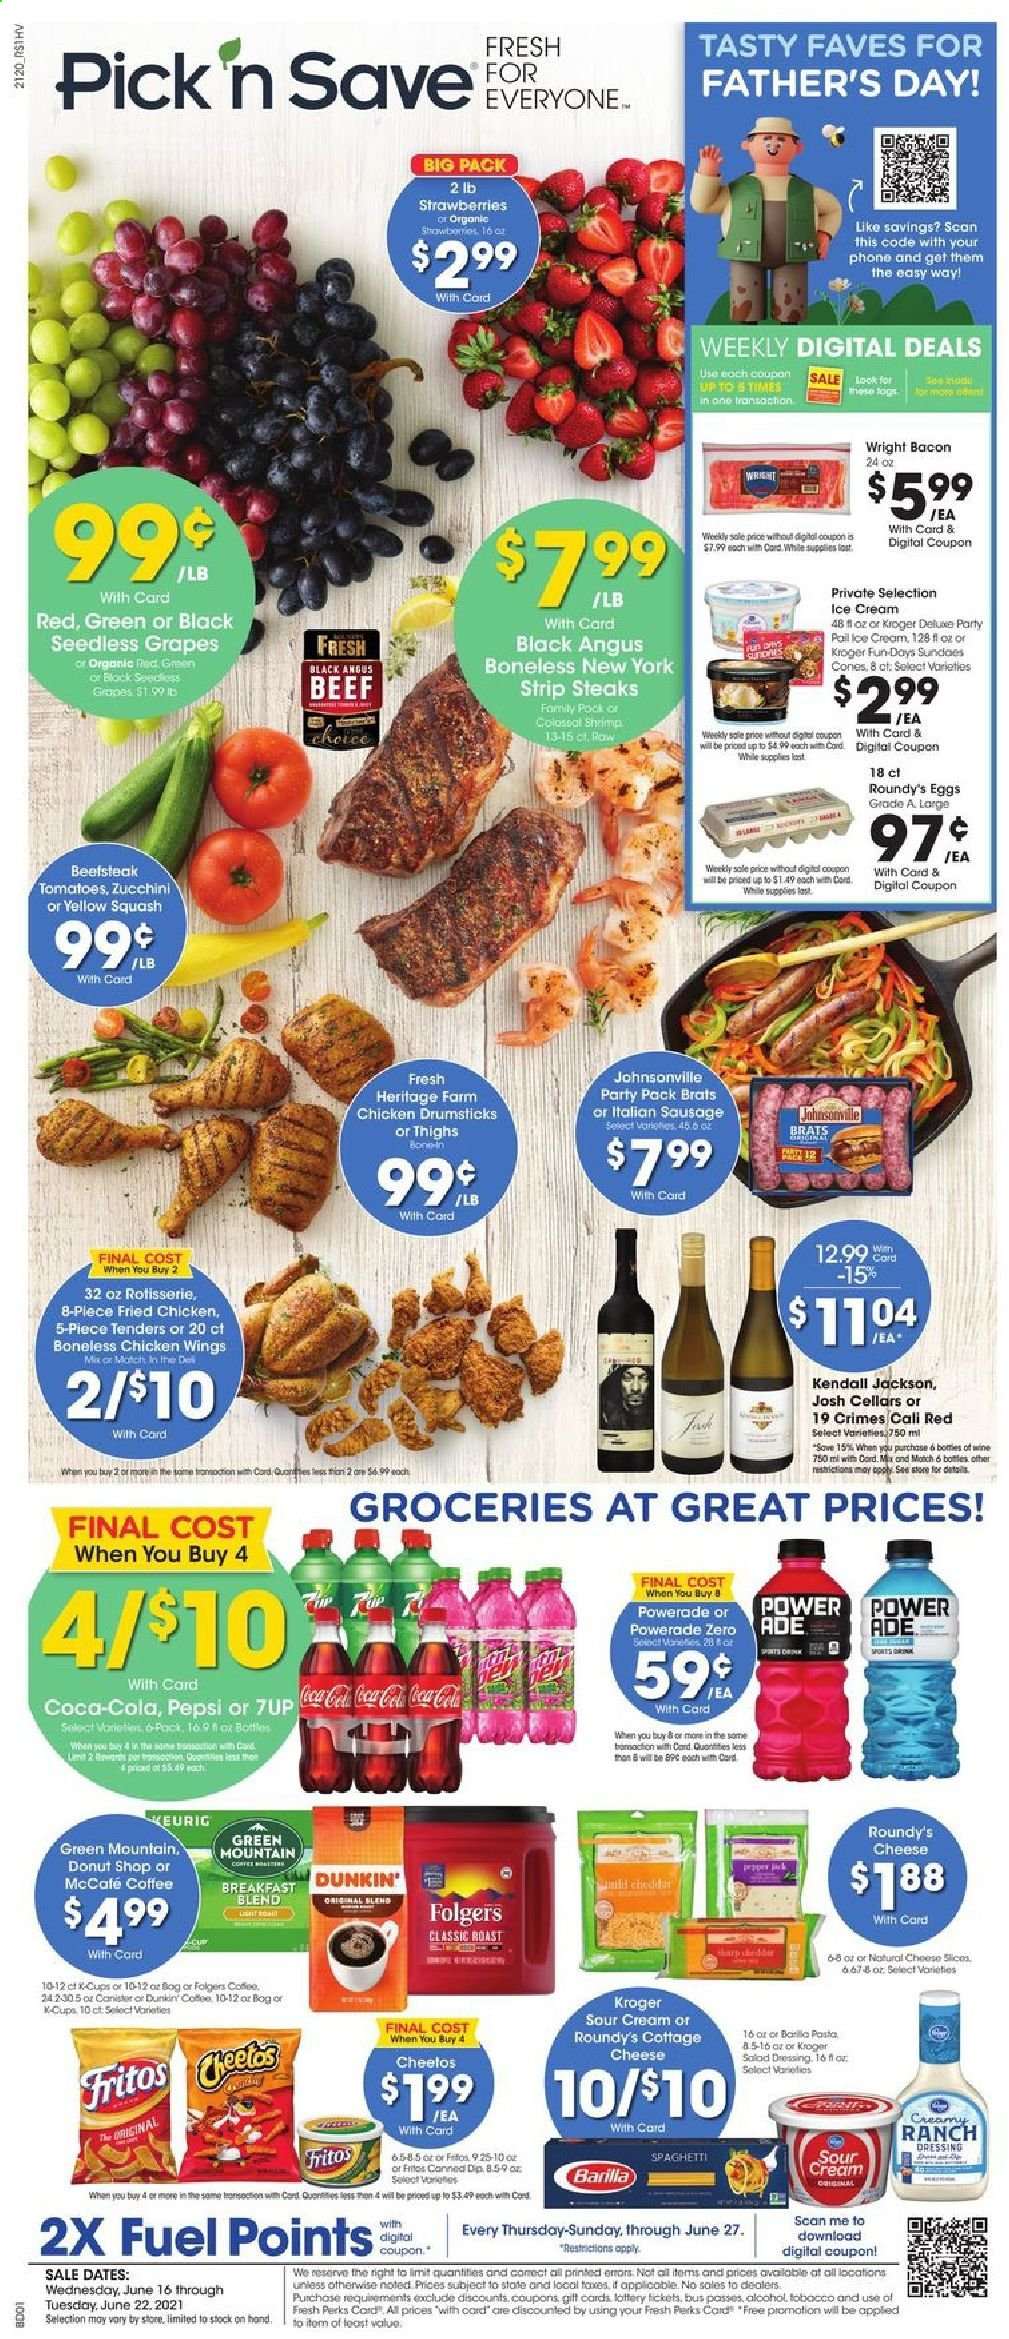 thumbnail - Pick ‘n Save Flyer - 06/16/2021 - 06/22/2021 - Sales products - seedless grapes, zucchini, yellow squash, grapes, strawberries, shrimps, spaghetti, pasta, fried chicken, Barilla, bacon, Johnsonville, sausage, italian sausage, cottage cheese, eggs, sour cream, ice cream, chicken wings, Fritos, dressing, Coca-Cola, Powerade, Pepsi, 7UP, coffee, Folgers, McCafe, breakfast blend, Green Mountain, wine, chicken drumsticks, beef meat, steak, striploin steak, Dior. Page 1.